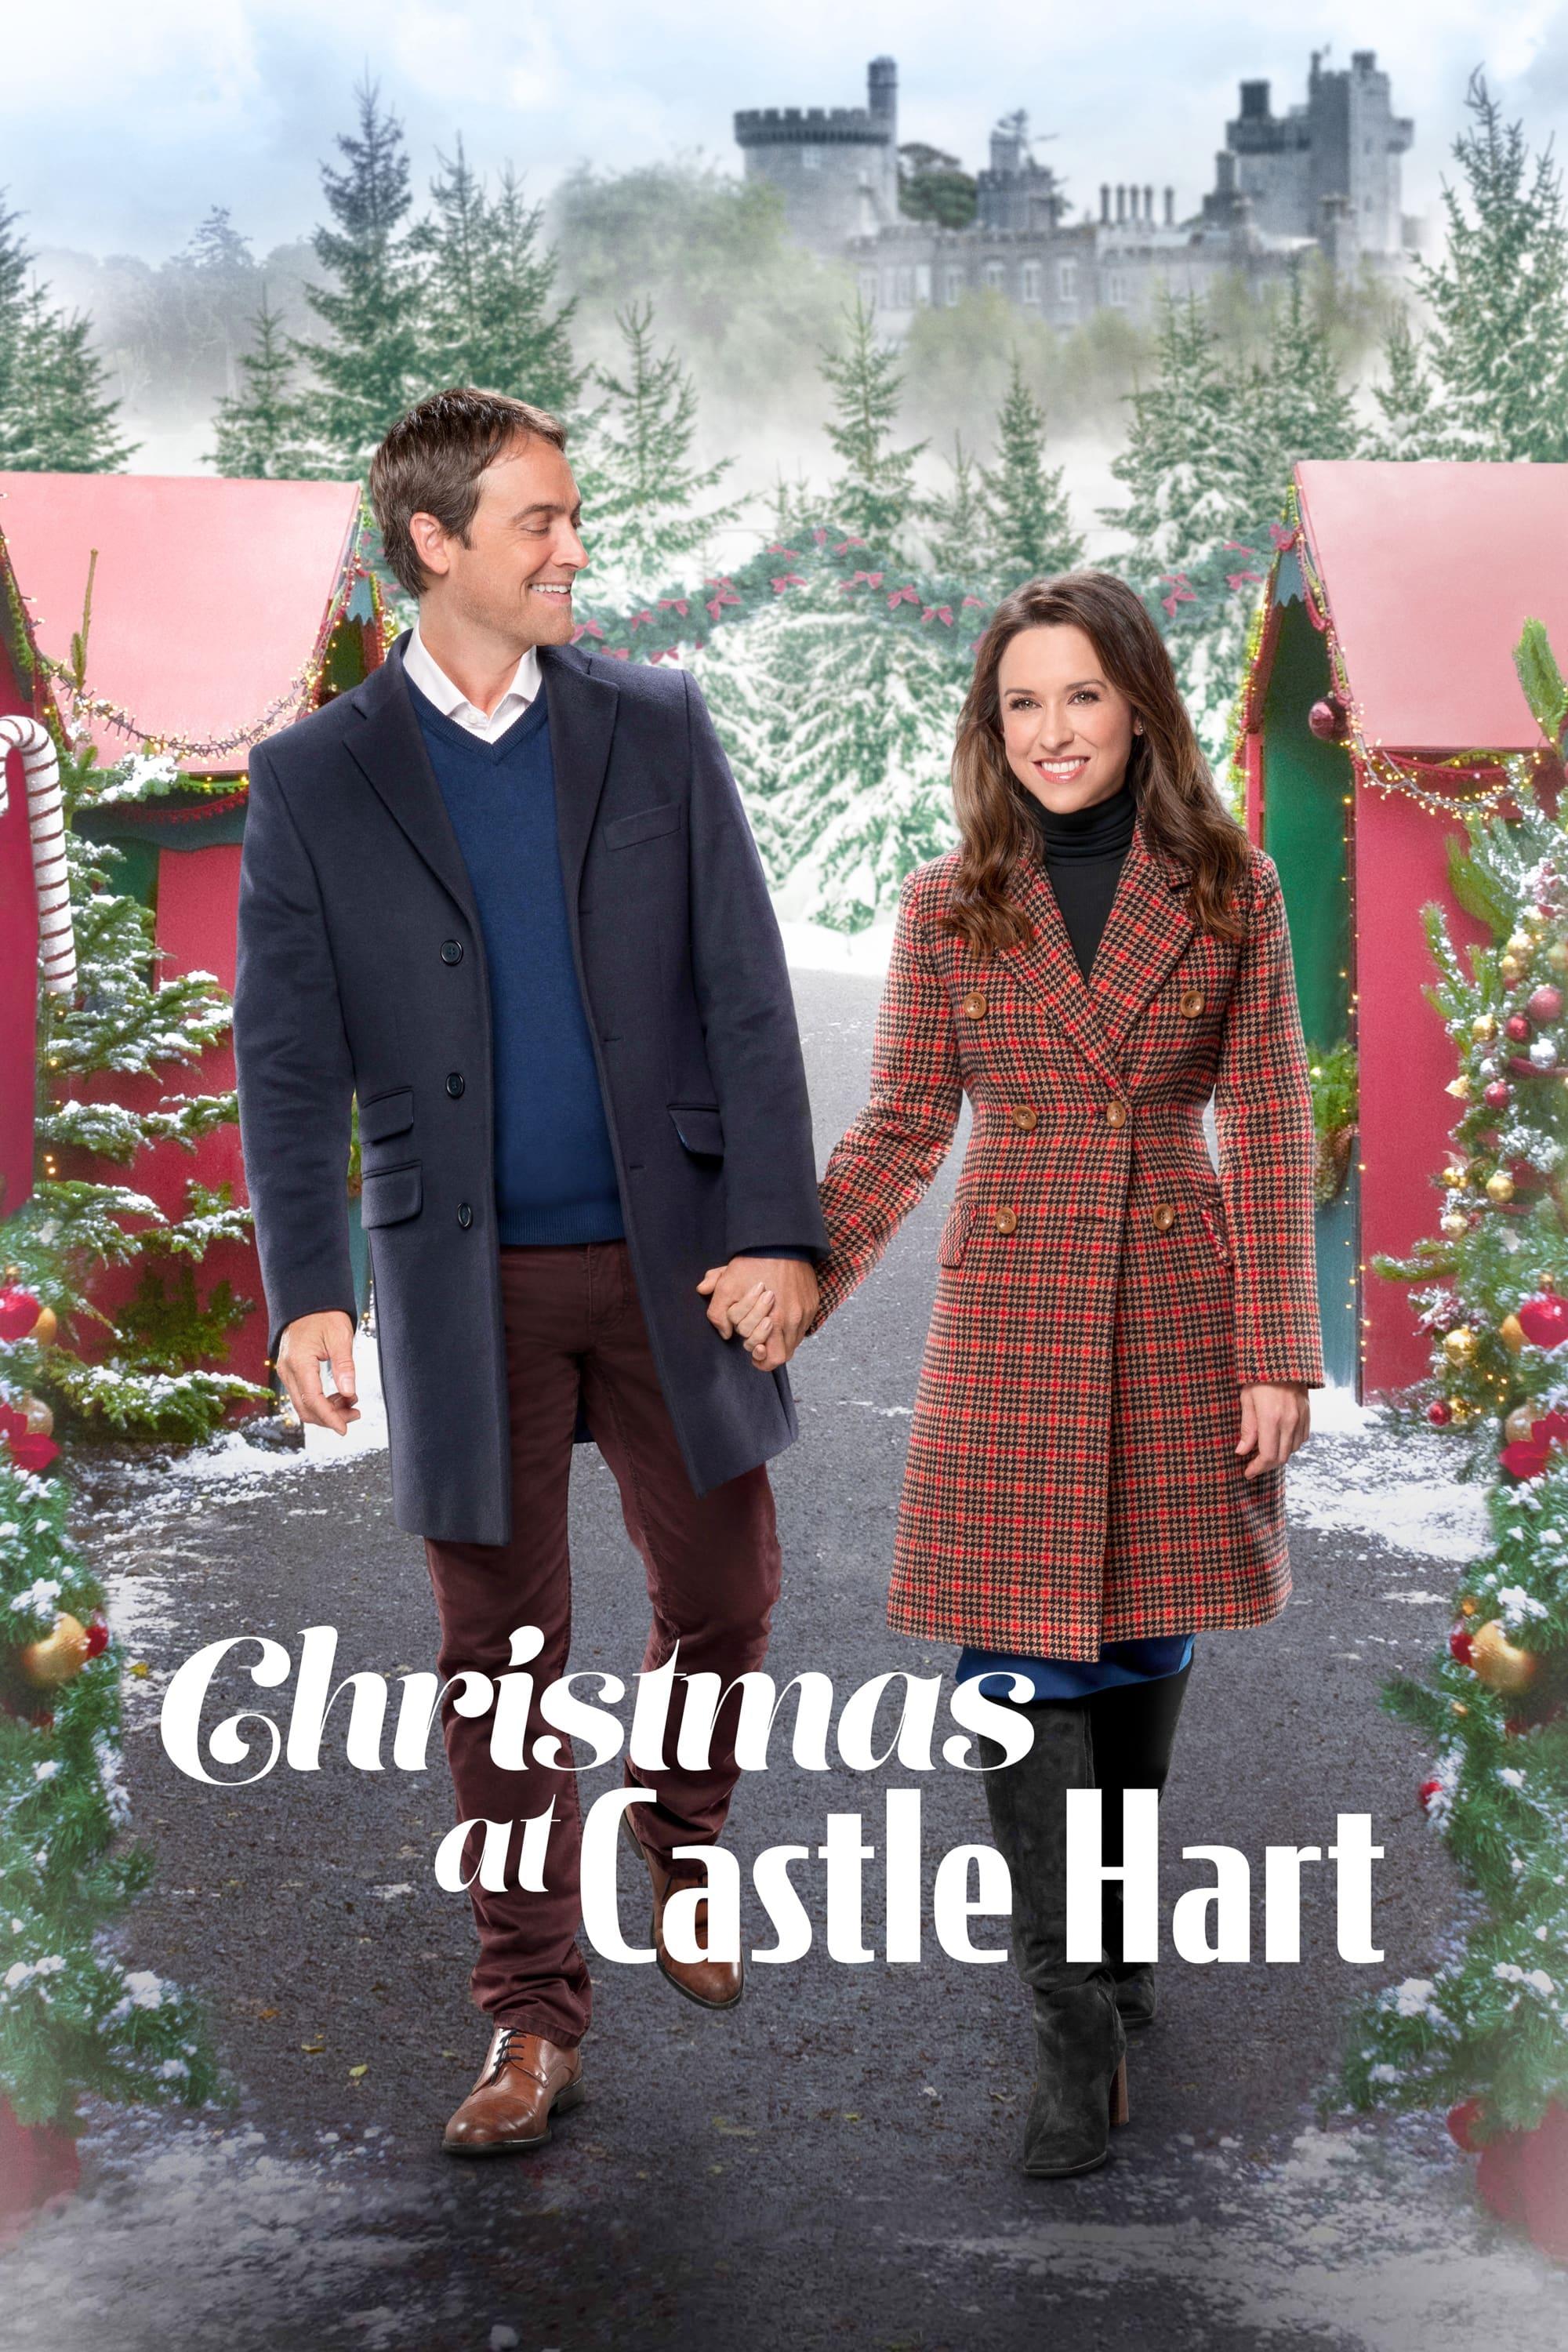 Christmas at Castle Hart poster